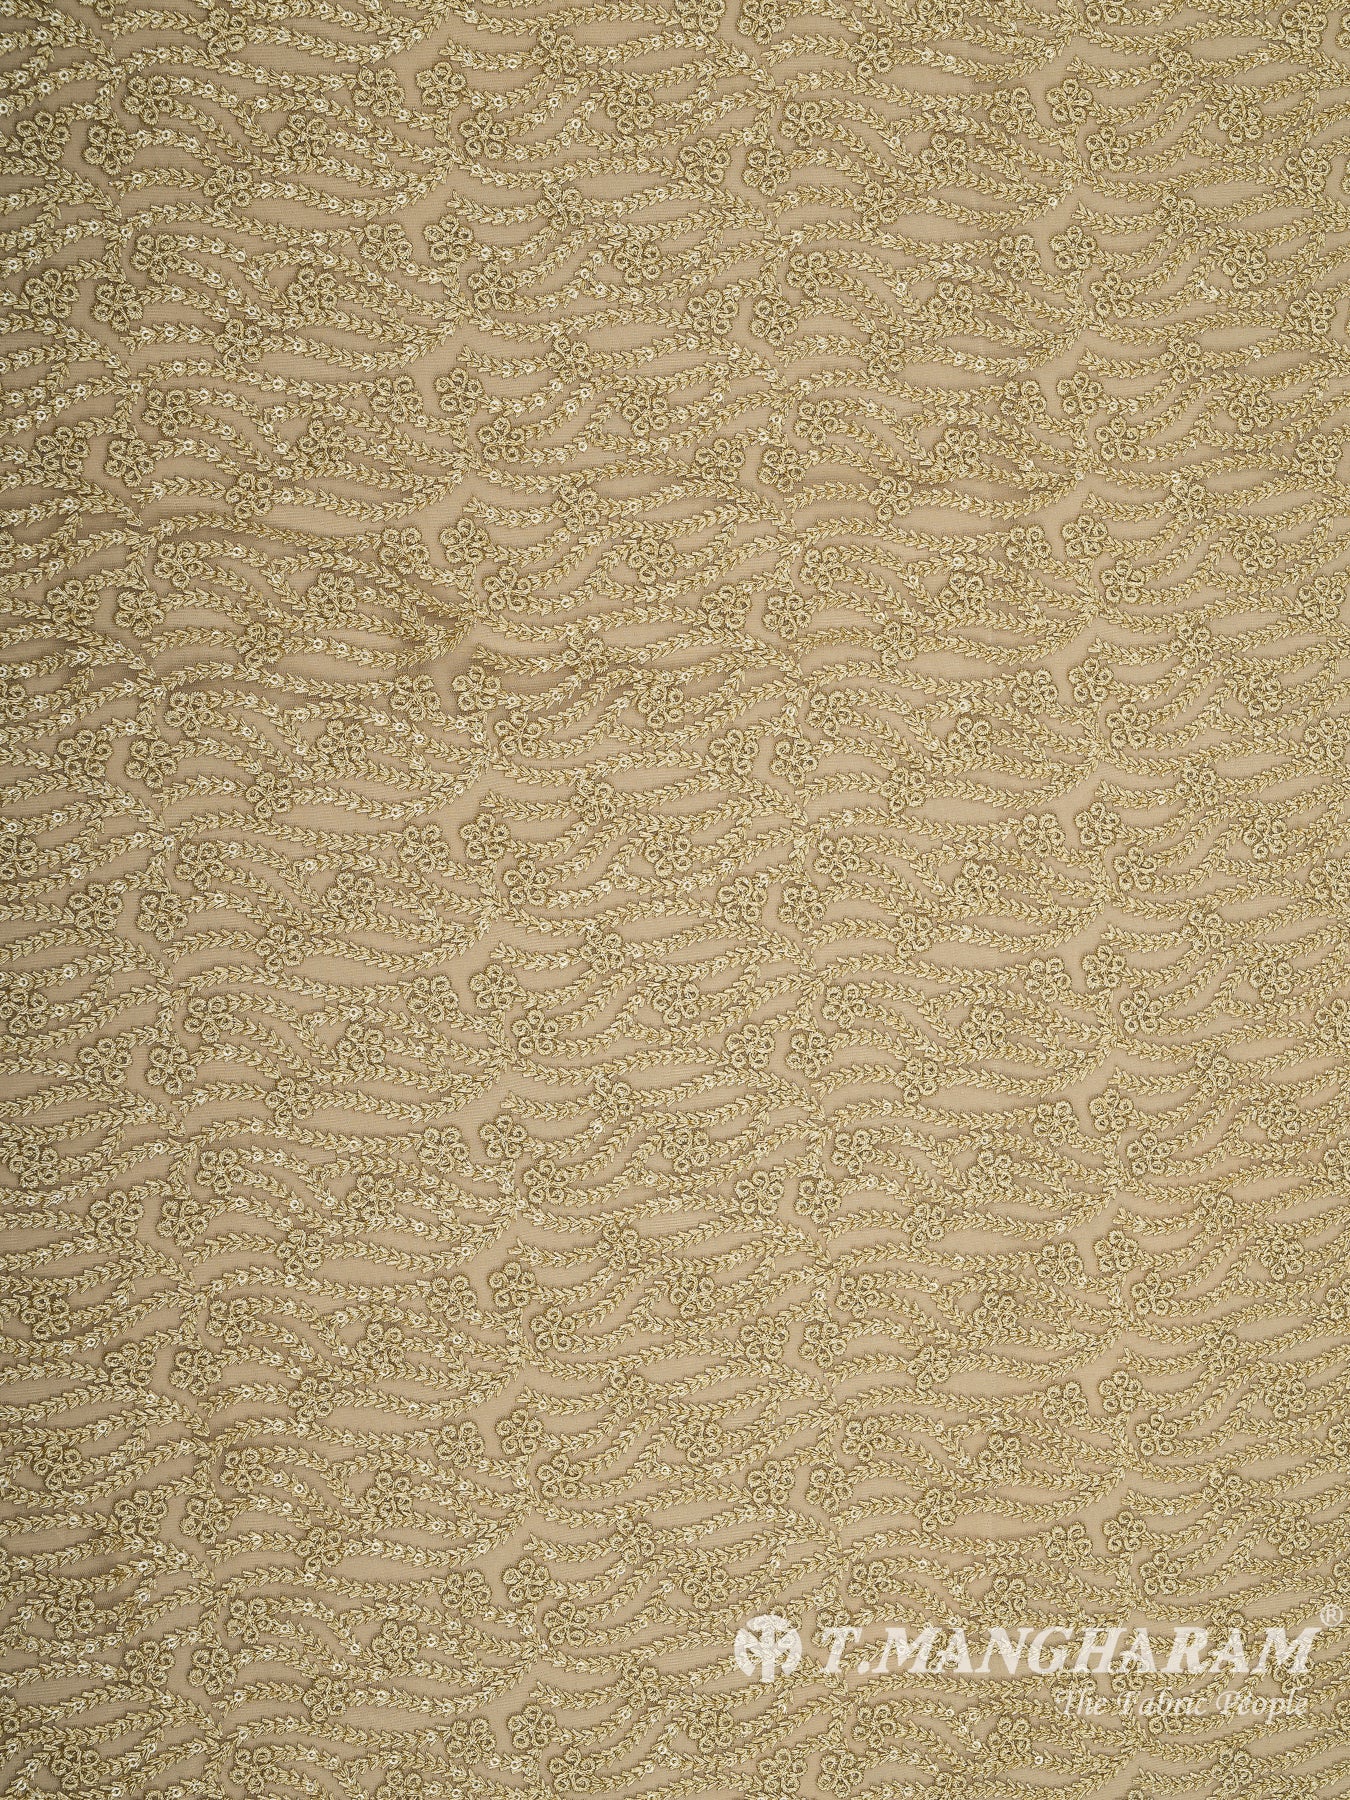 Green Net Embroidery Fabric - EC8433 view-3